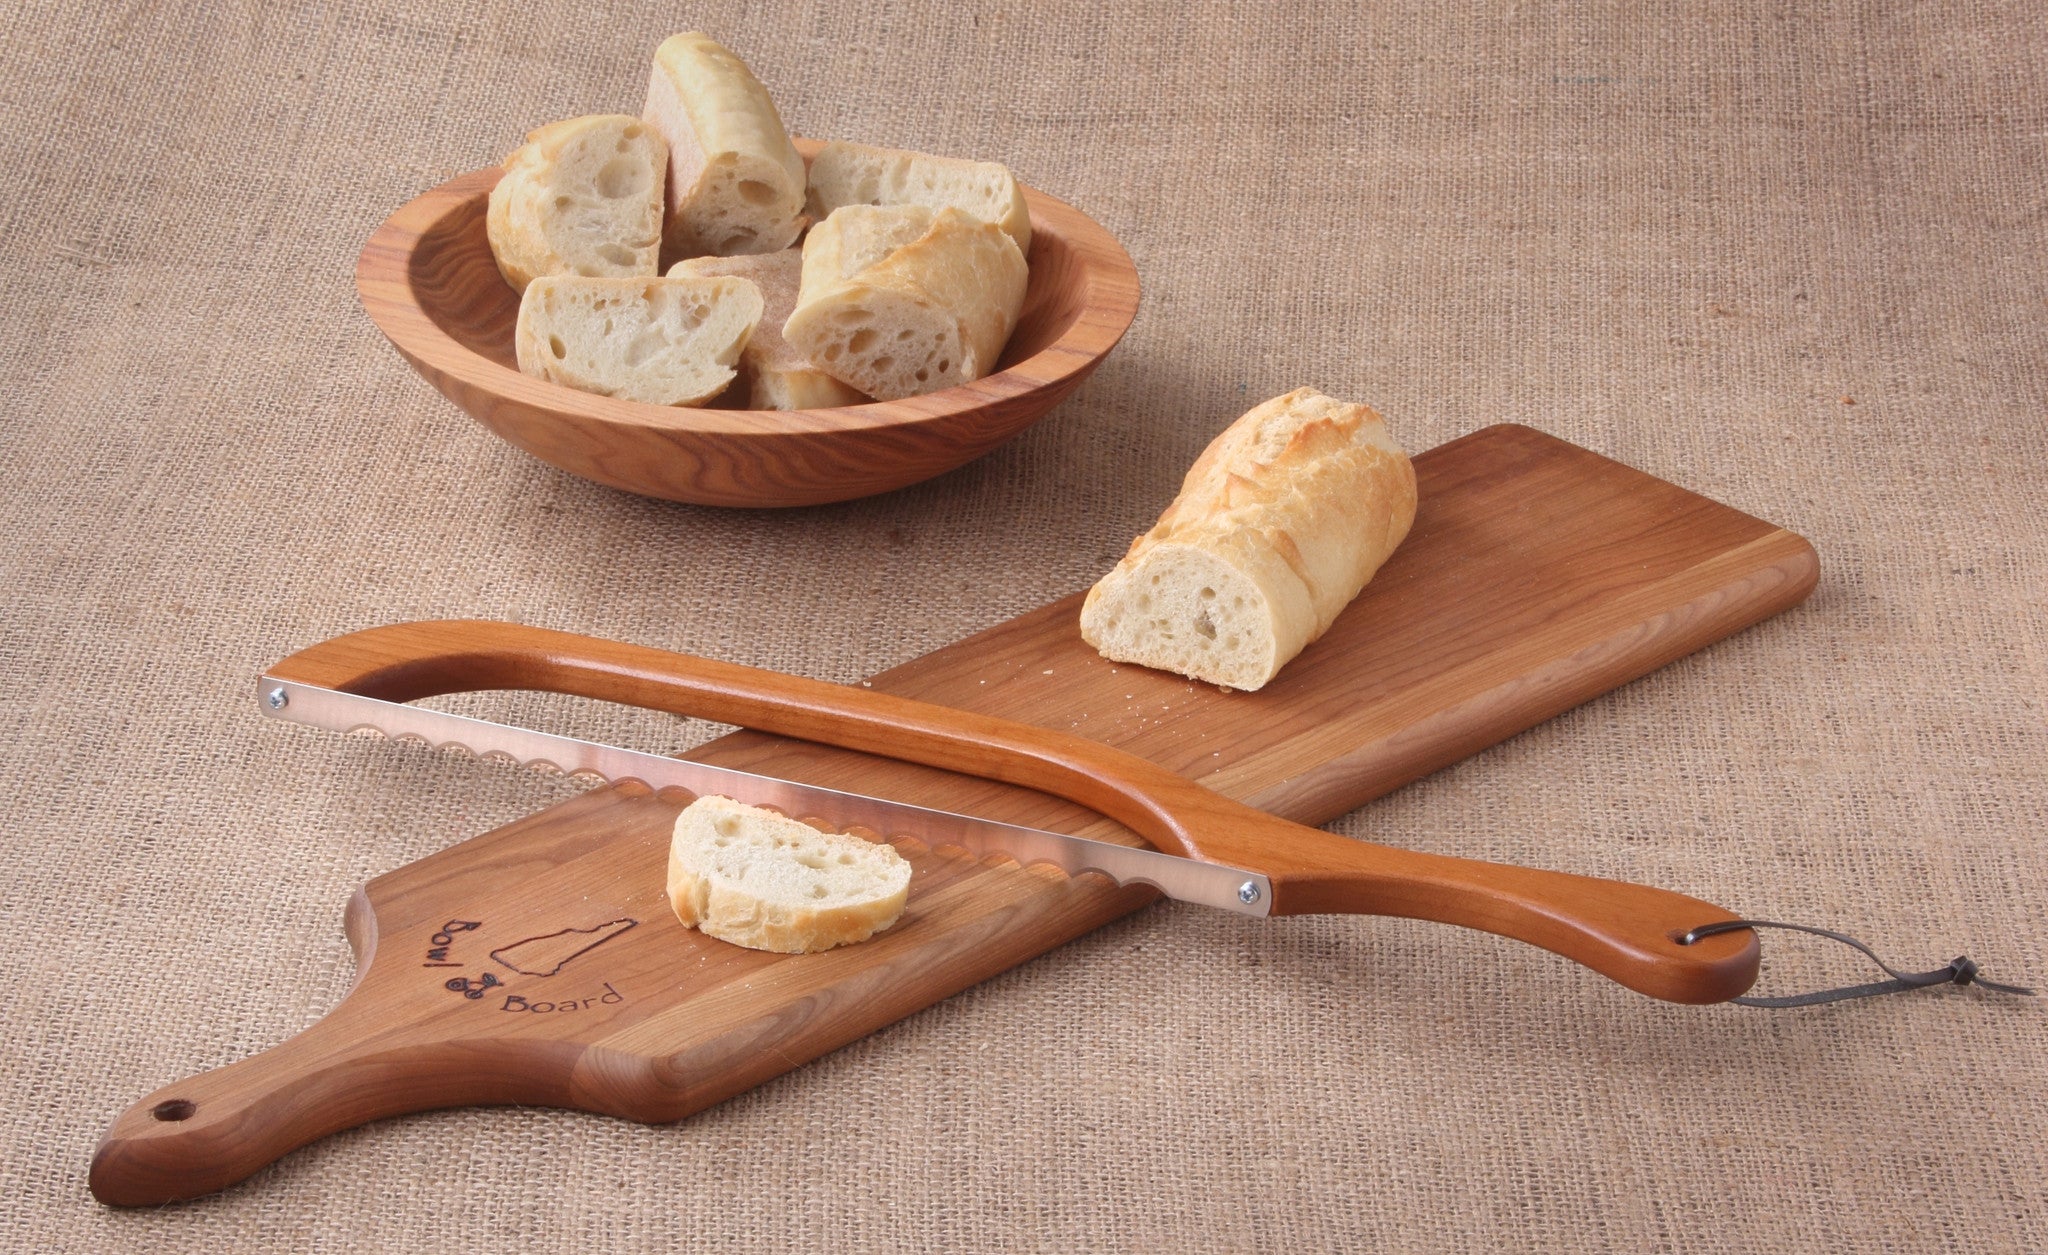 Tcwhniev 15.7 Inches Bread Knife, Wooden Bread Bow Knife, Serrated Bagel Knife, Sourdough Cutter Fiddle Bow Bread Slicer Knife for Homemade Bread